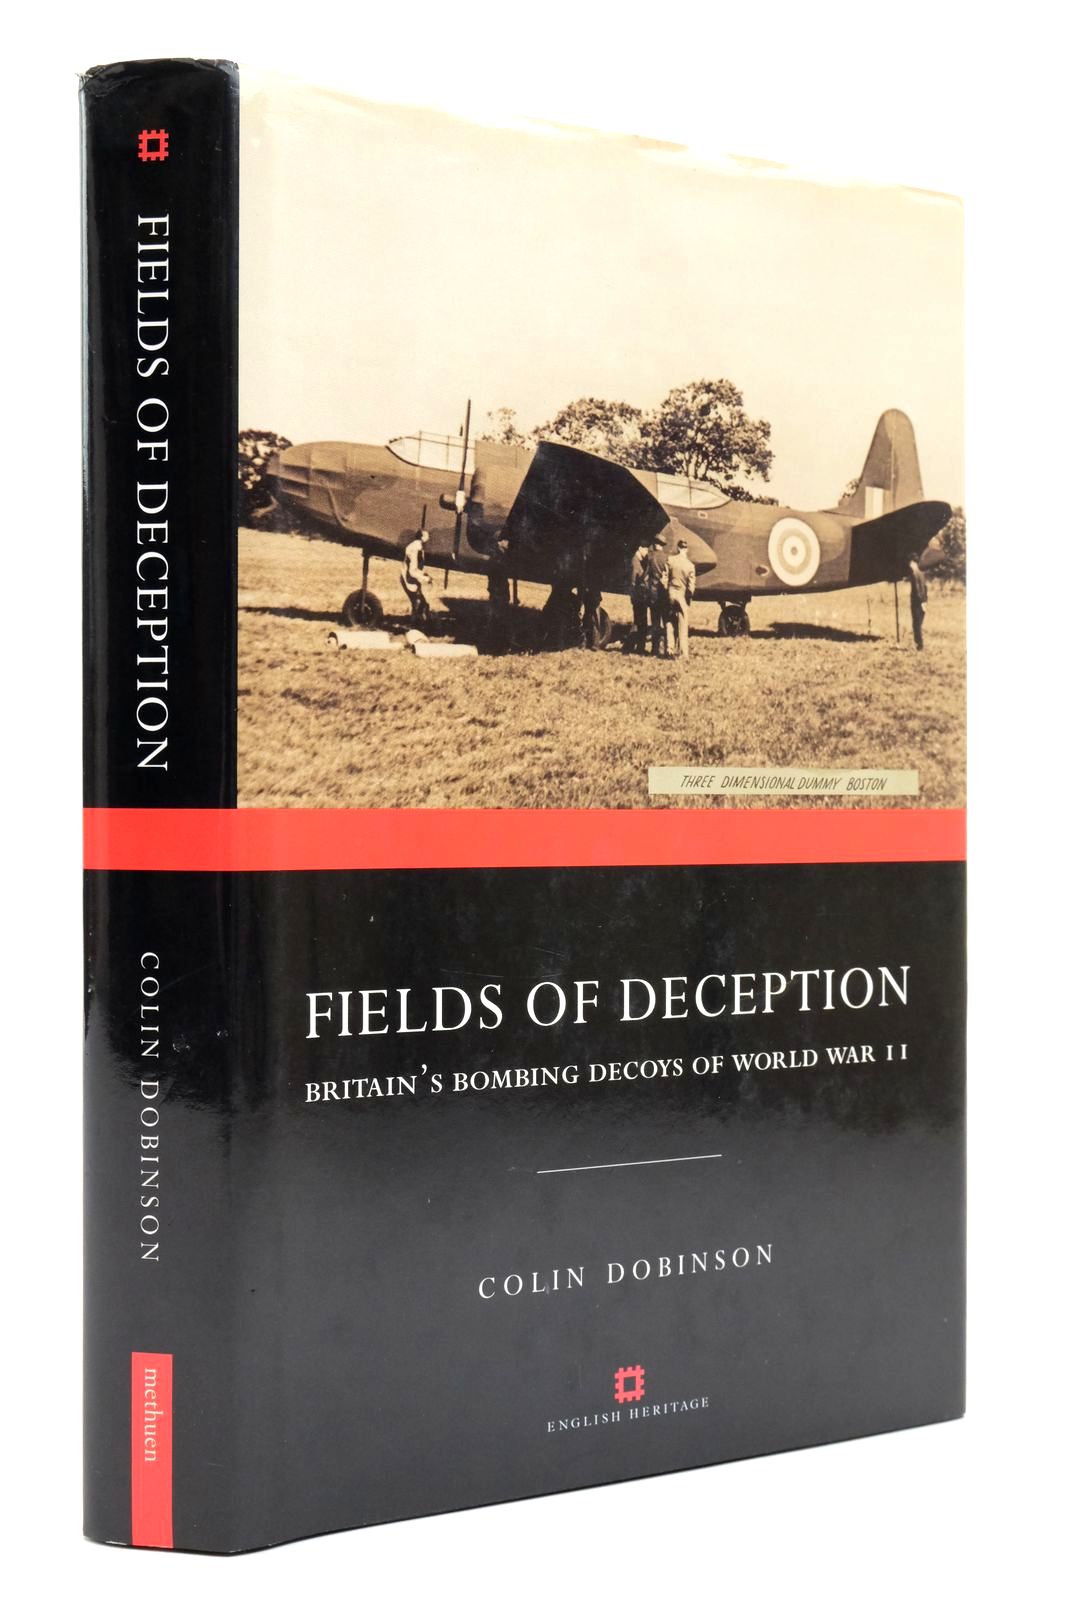 Photo of FIELDS OF DECEPTION: BRITAIN'S BOMBING DECOYS OF THE SECOND WORLD WAR written by Dobinson, Colin published by Methuen (STOCK CODE: 2138830)  for sale by Stella & Rose's Books